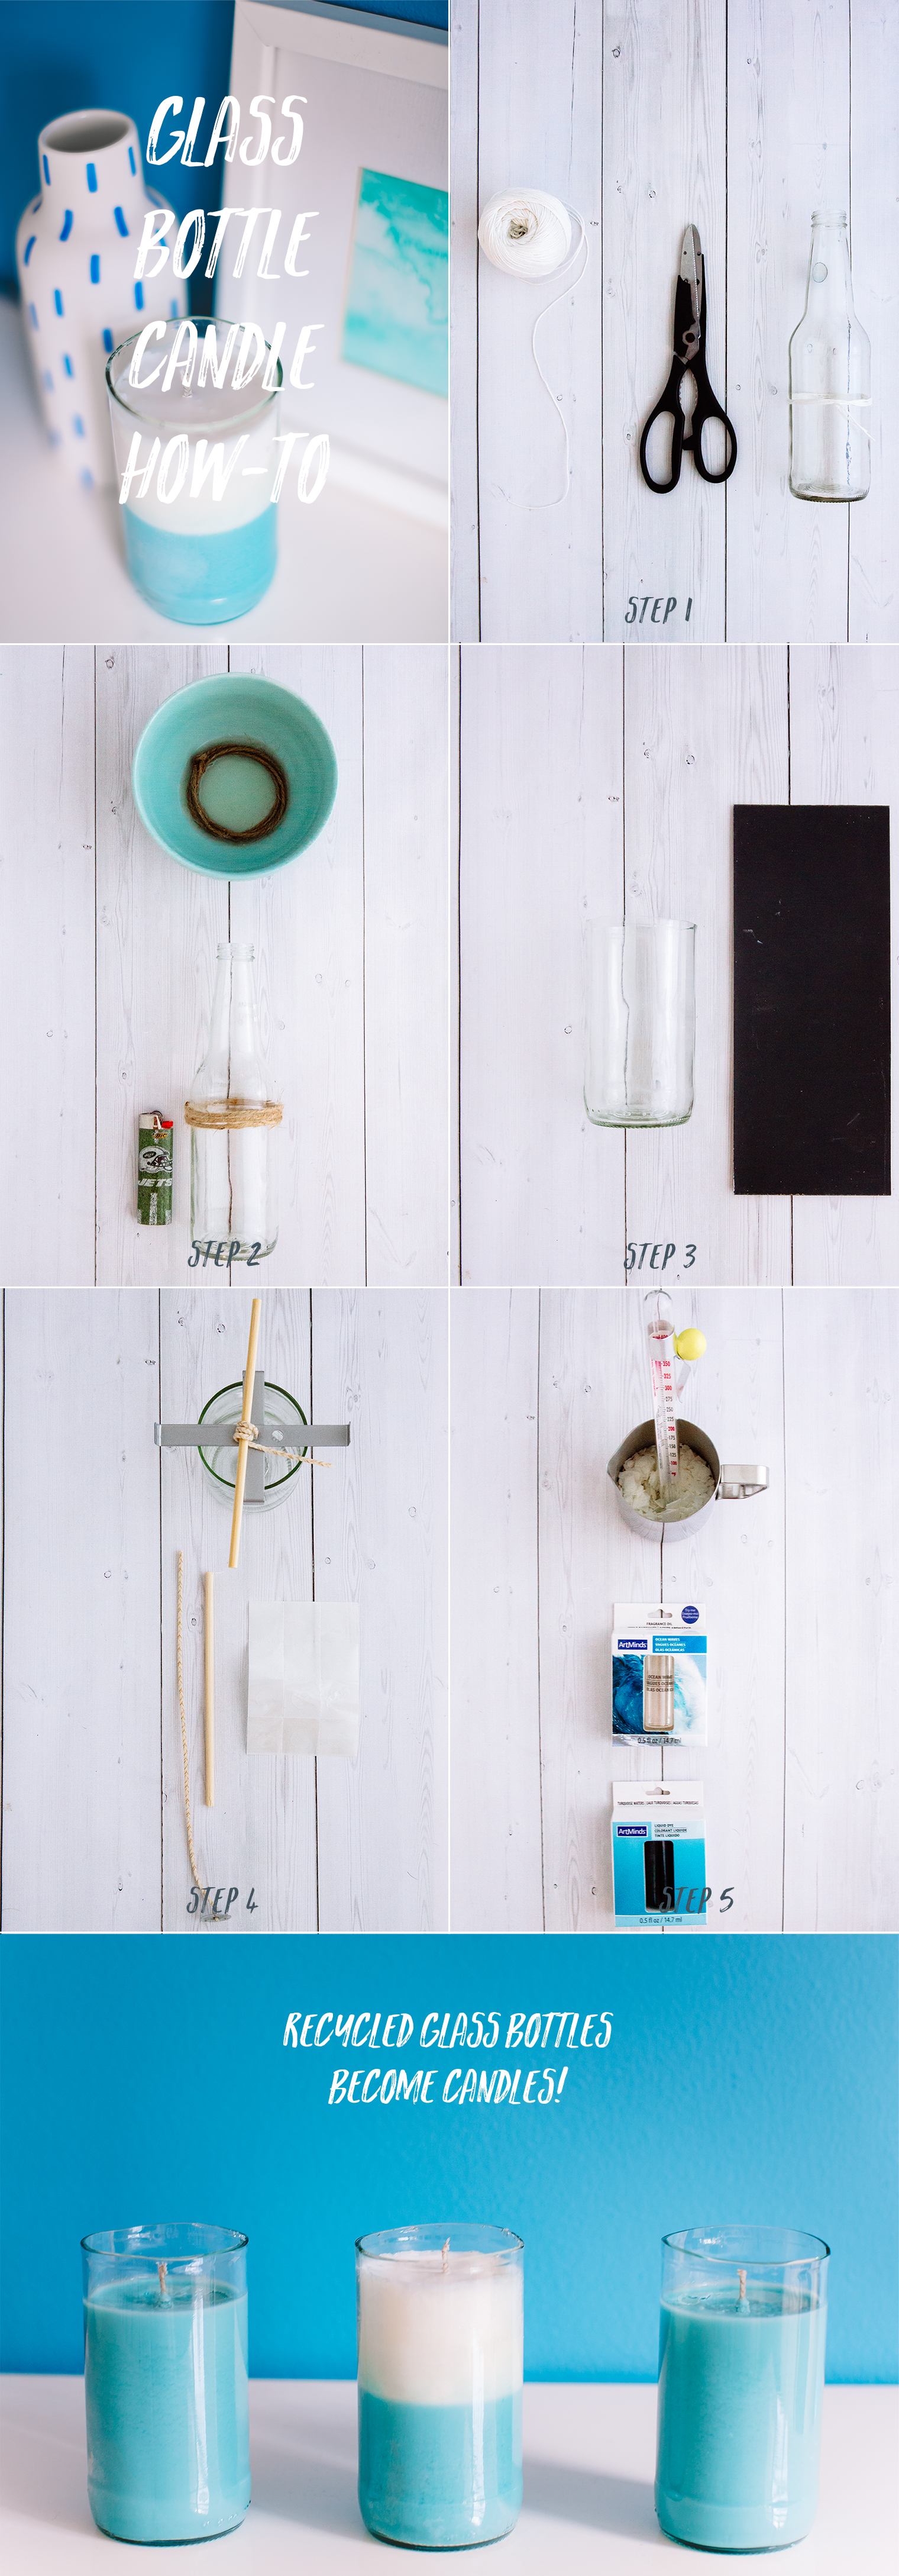 DIY-Glass-Bottle-Homemade-Scented-Candle-Project-How-To-2